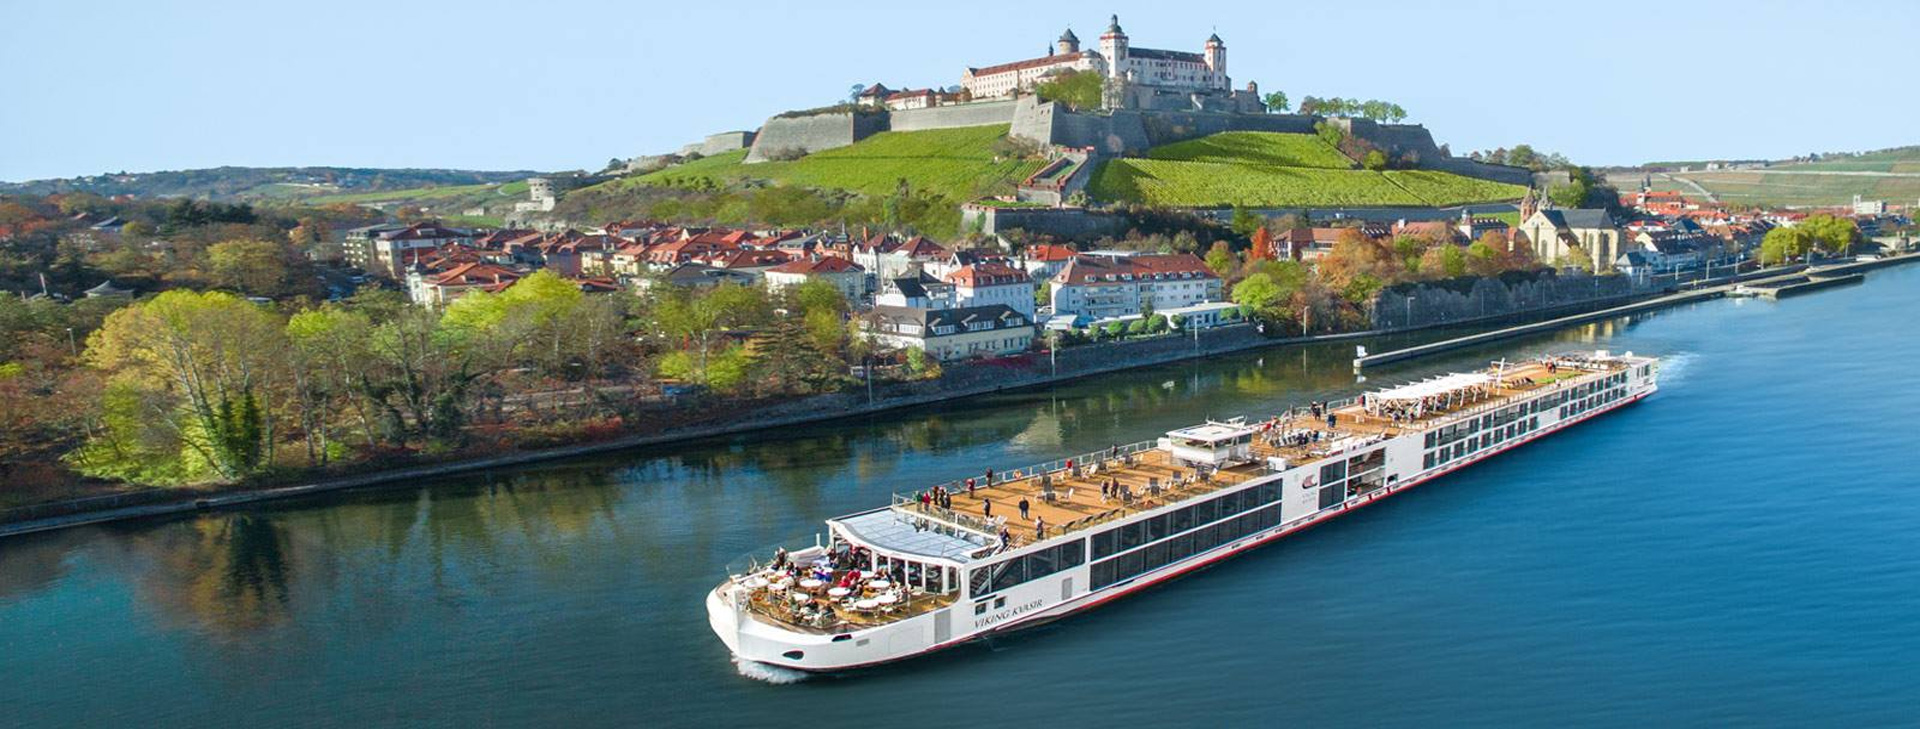 River Cruise travel specialist